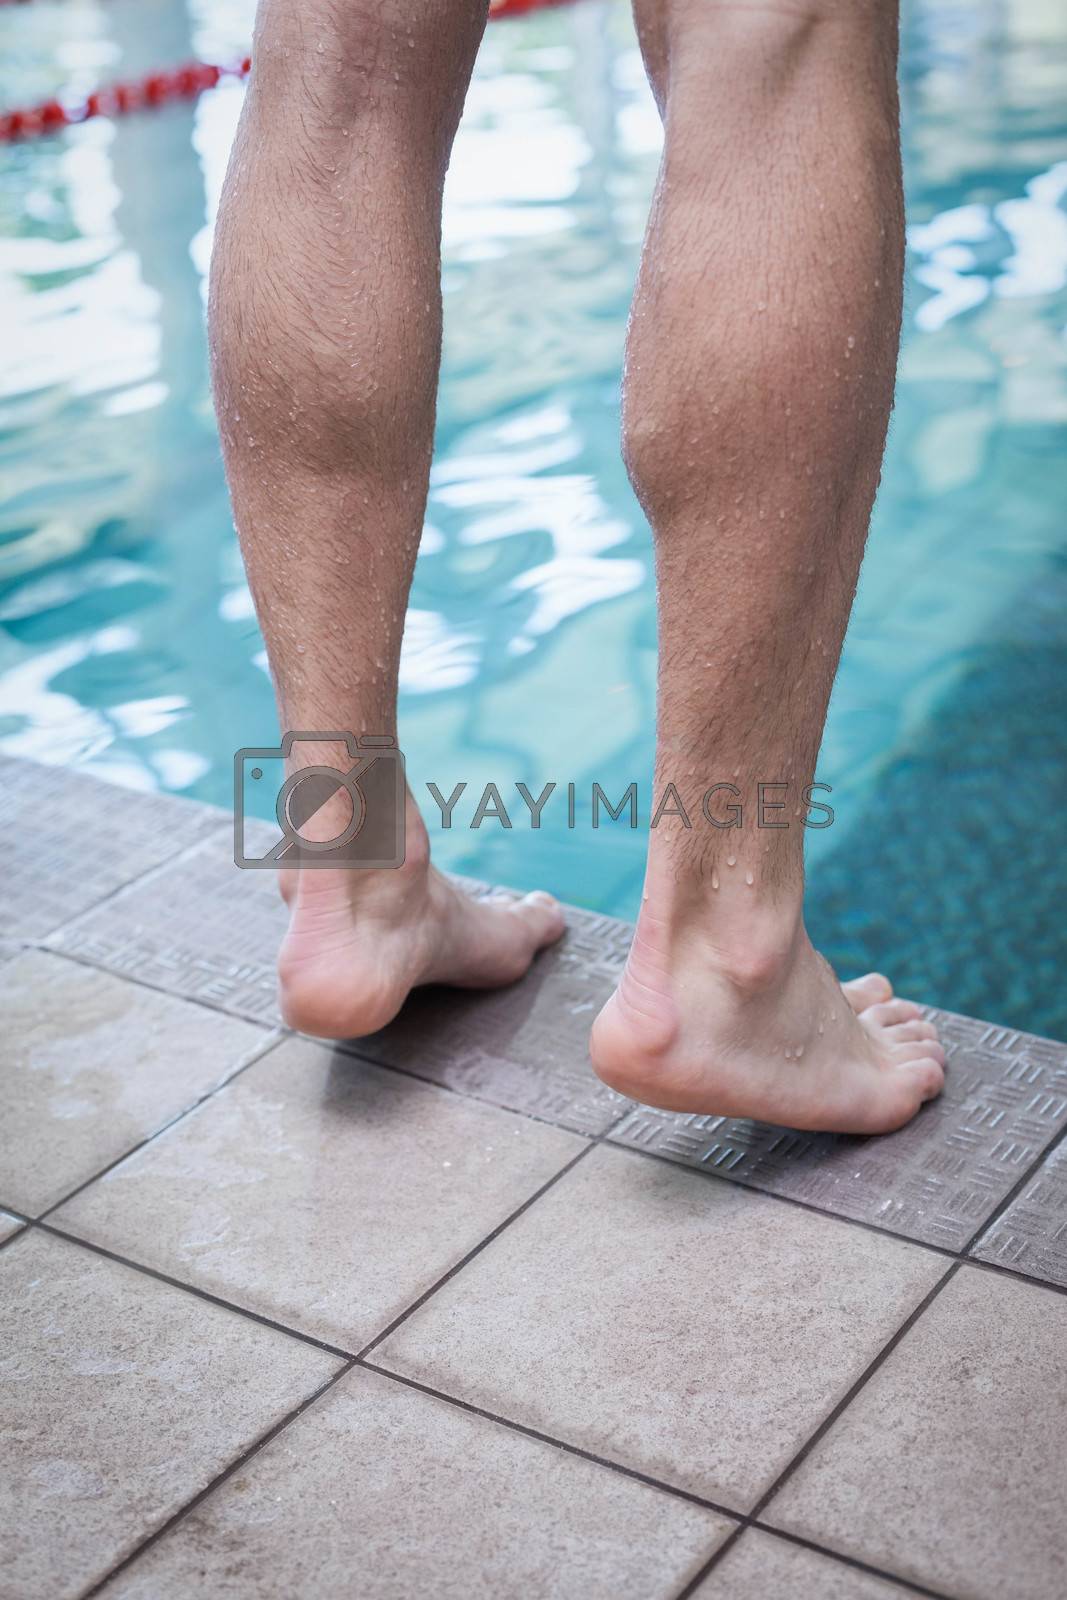 Royalty free image of Close up of masculine feet by Wavebreakmedia